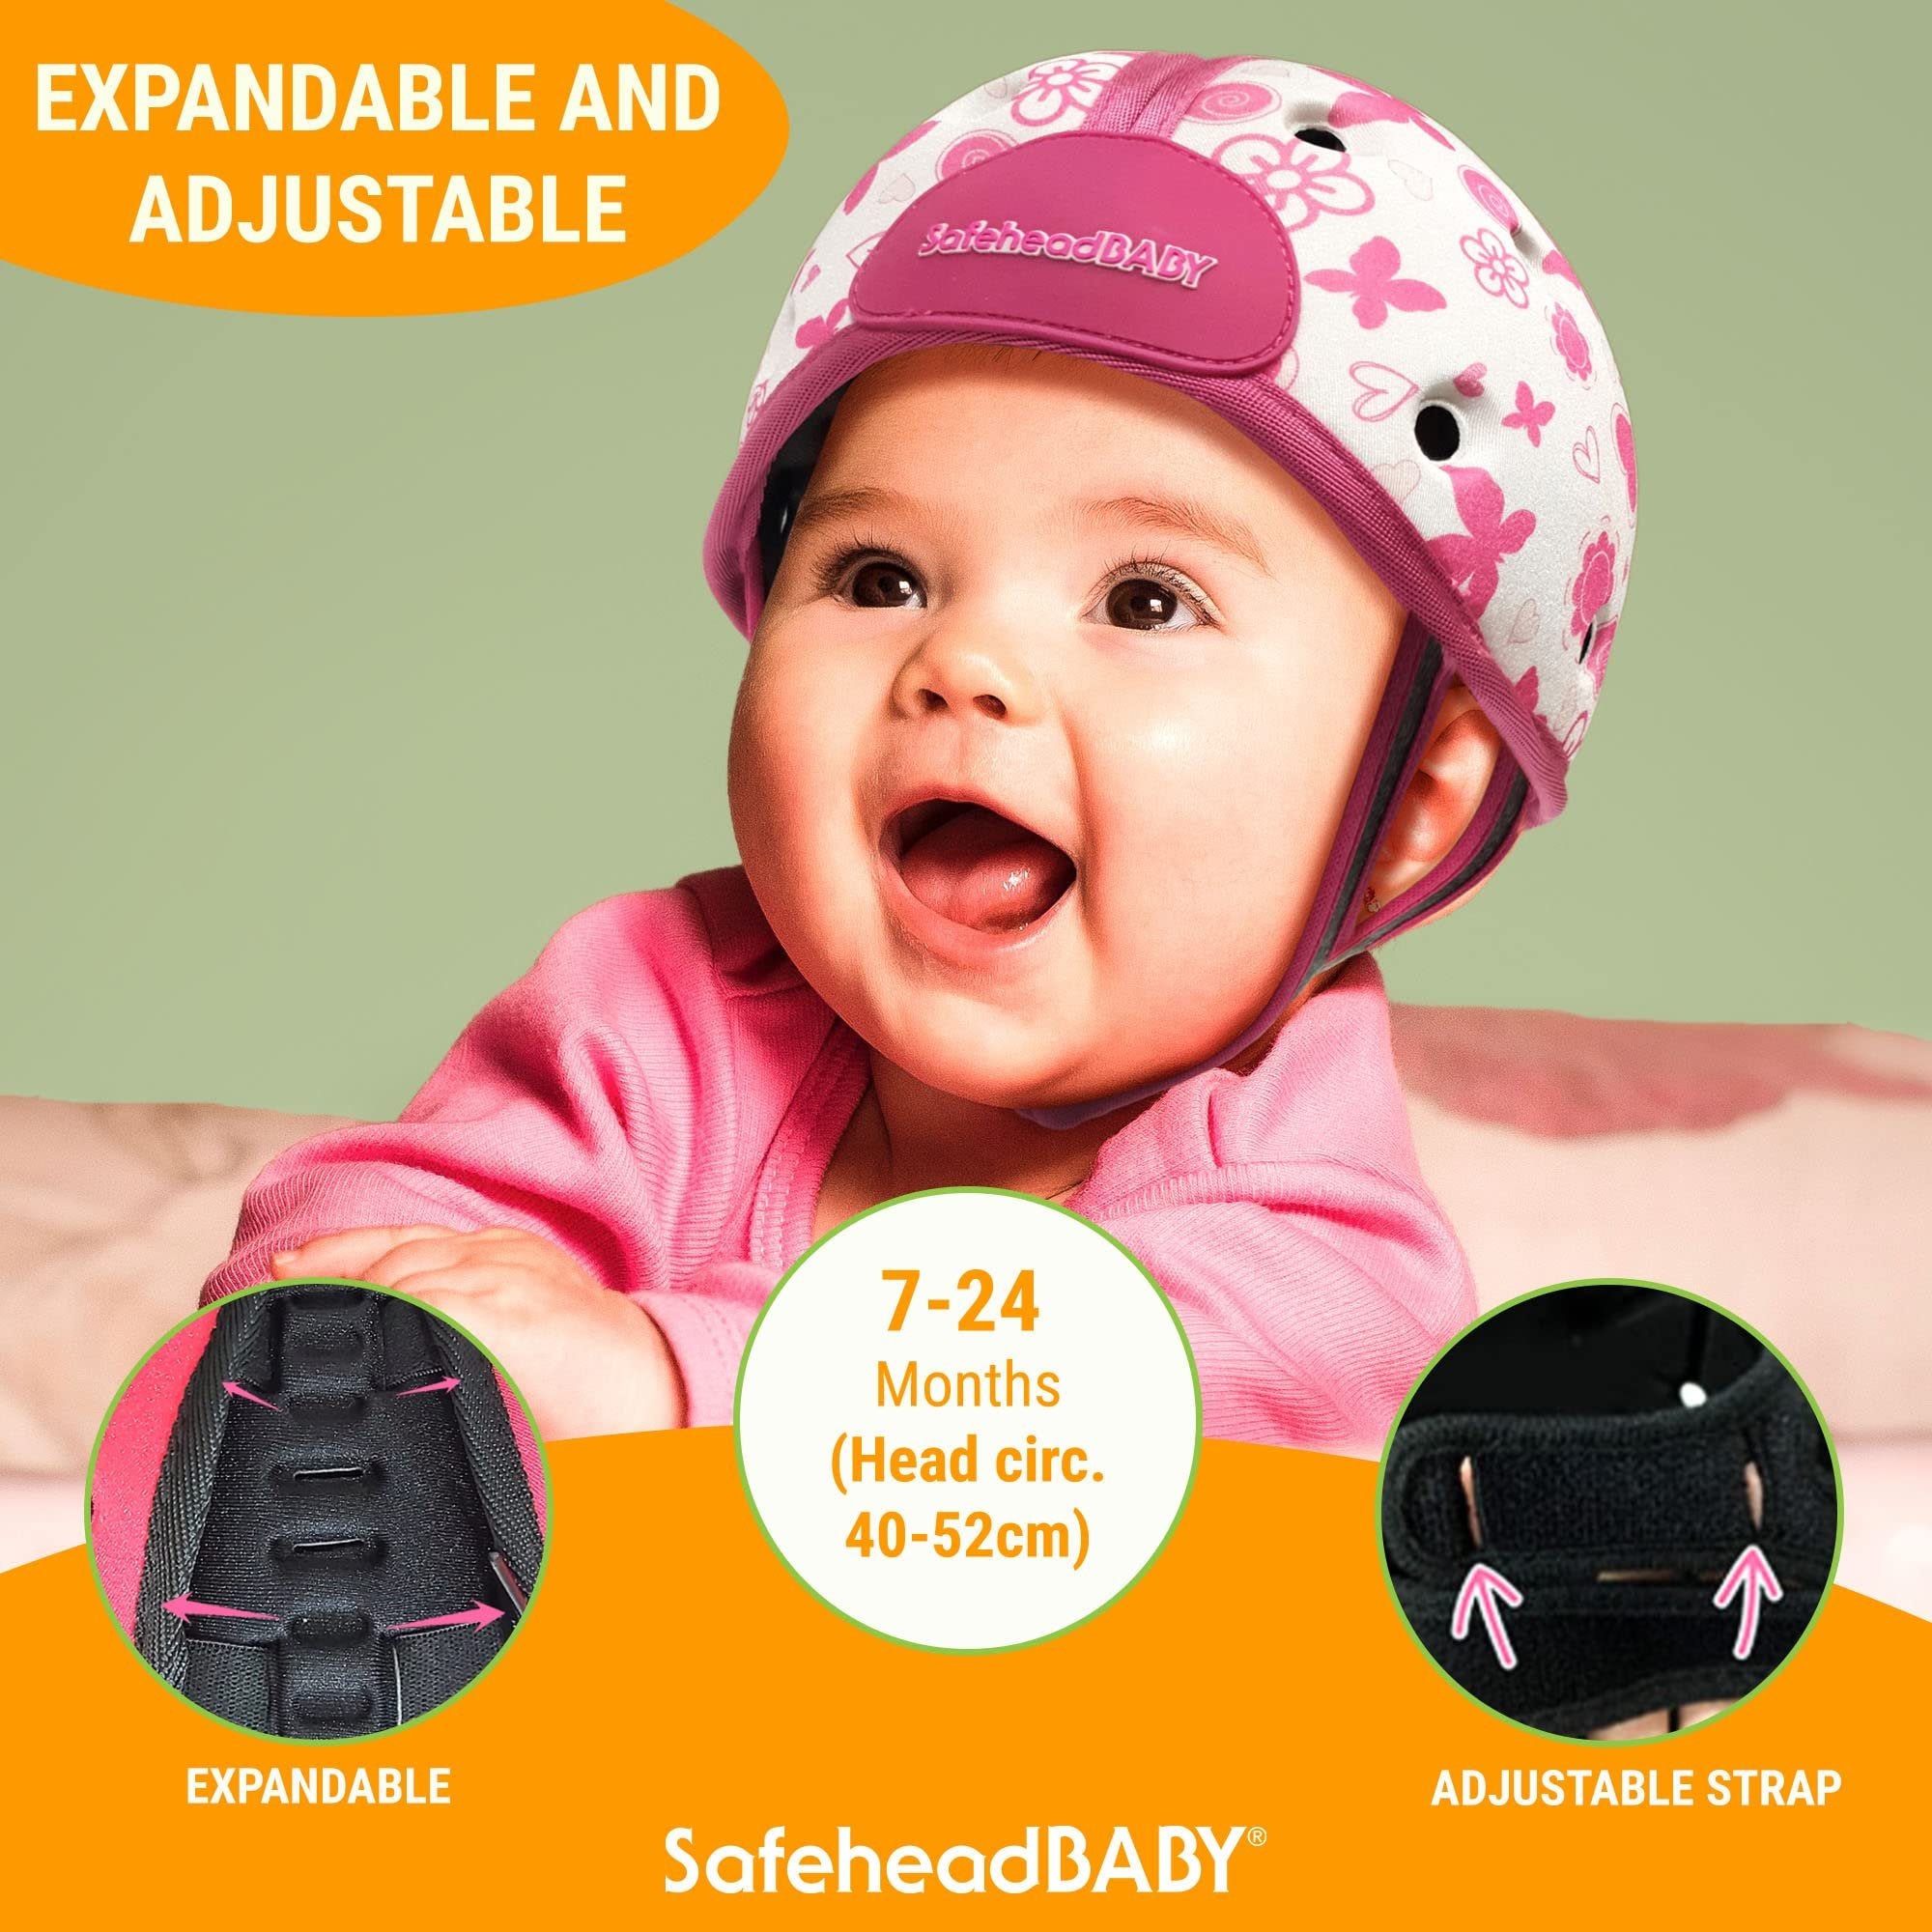 SafeheadBABY Infant Safety Helmet - Giraffe Baby - One Size - Crawling/Walking/Toddler Head Protection - Adjustable & Ultra-Lightweight